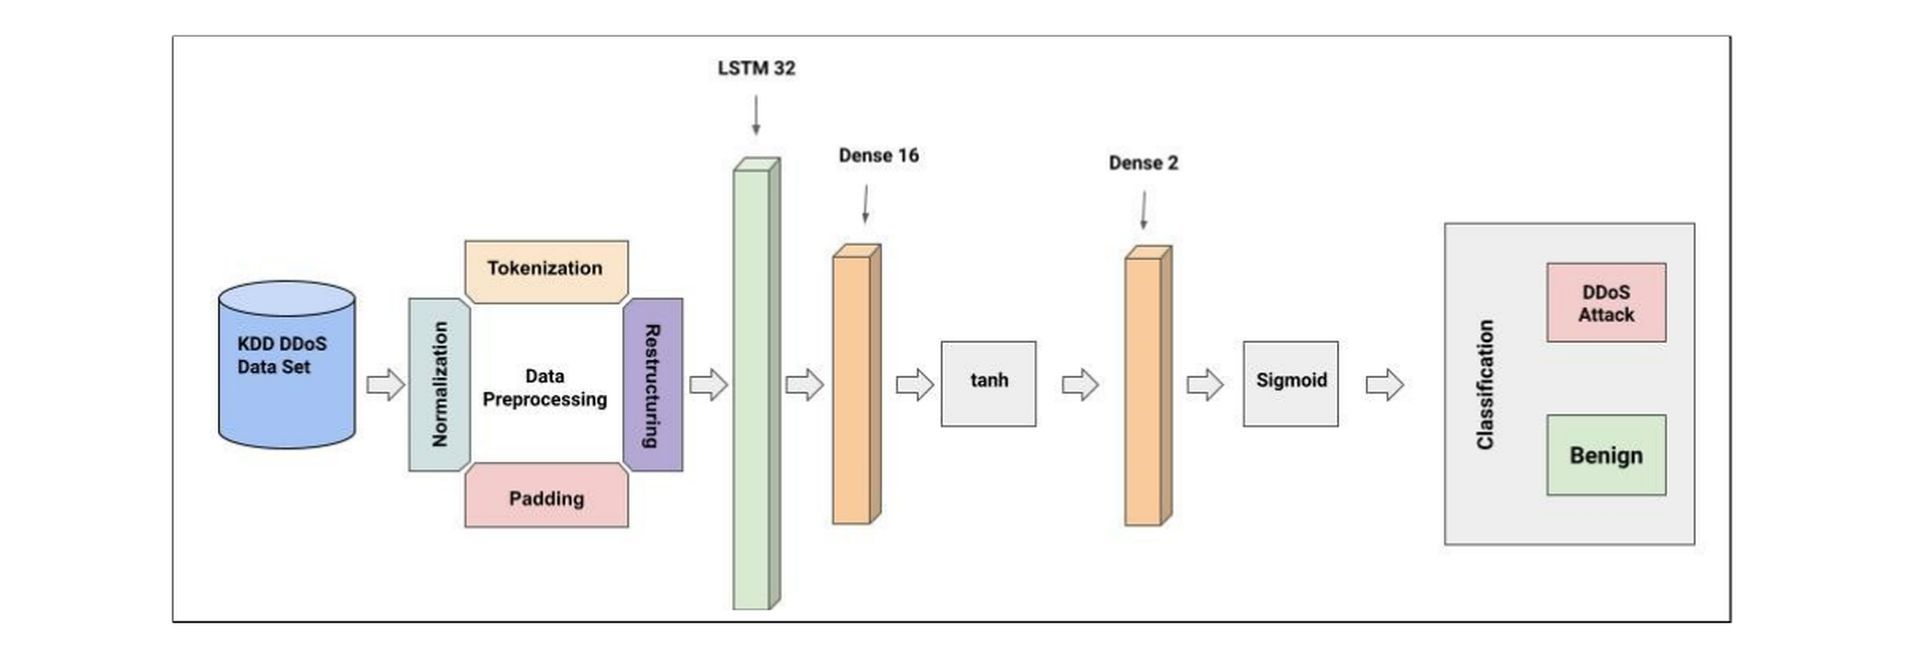 Researchers From Citadel Developed A Deep Learning Method To Generate Dns Amplification Attacks.